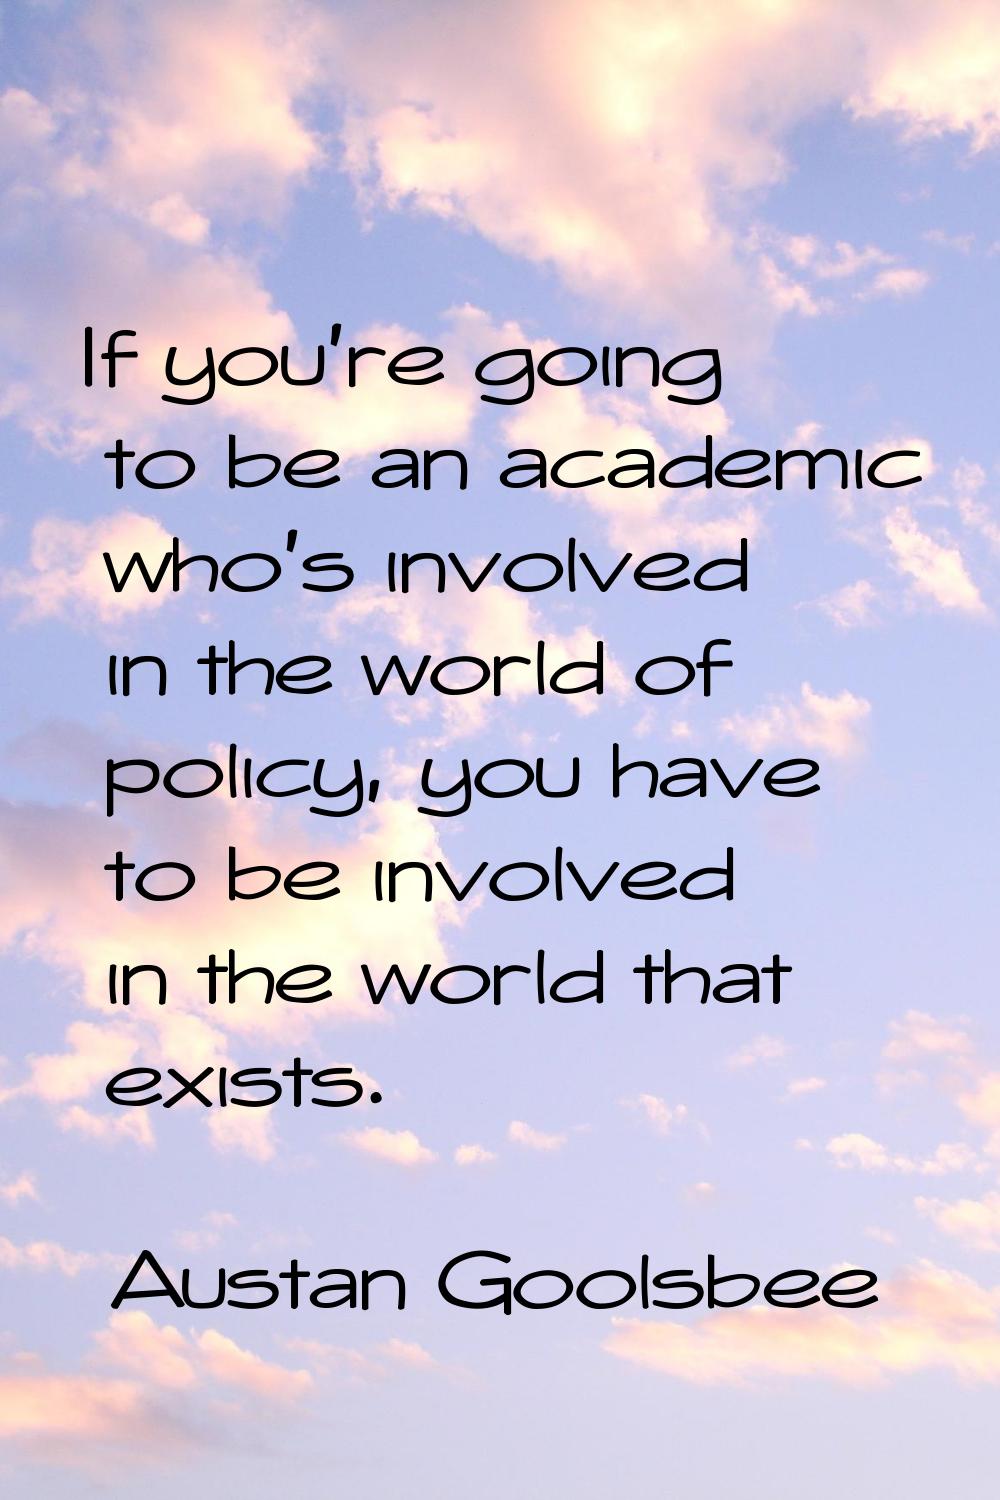 If you're going to be an academic who's involved in the world of policy, you have to be involved in